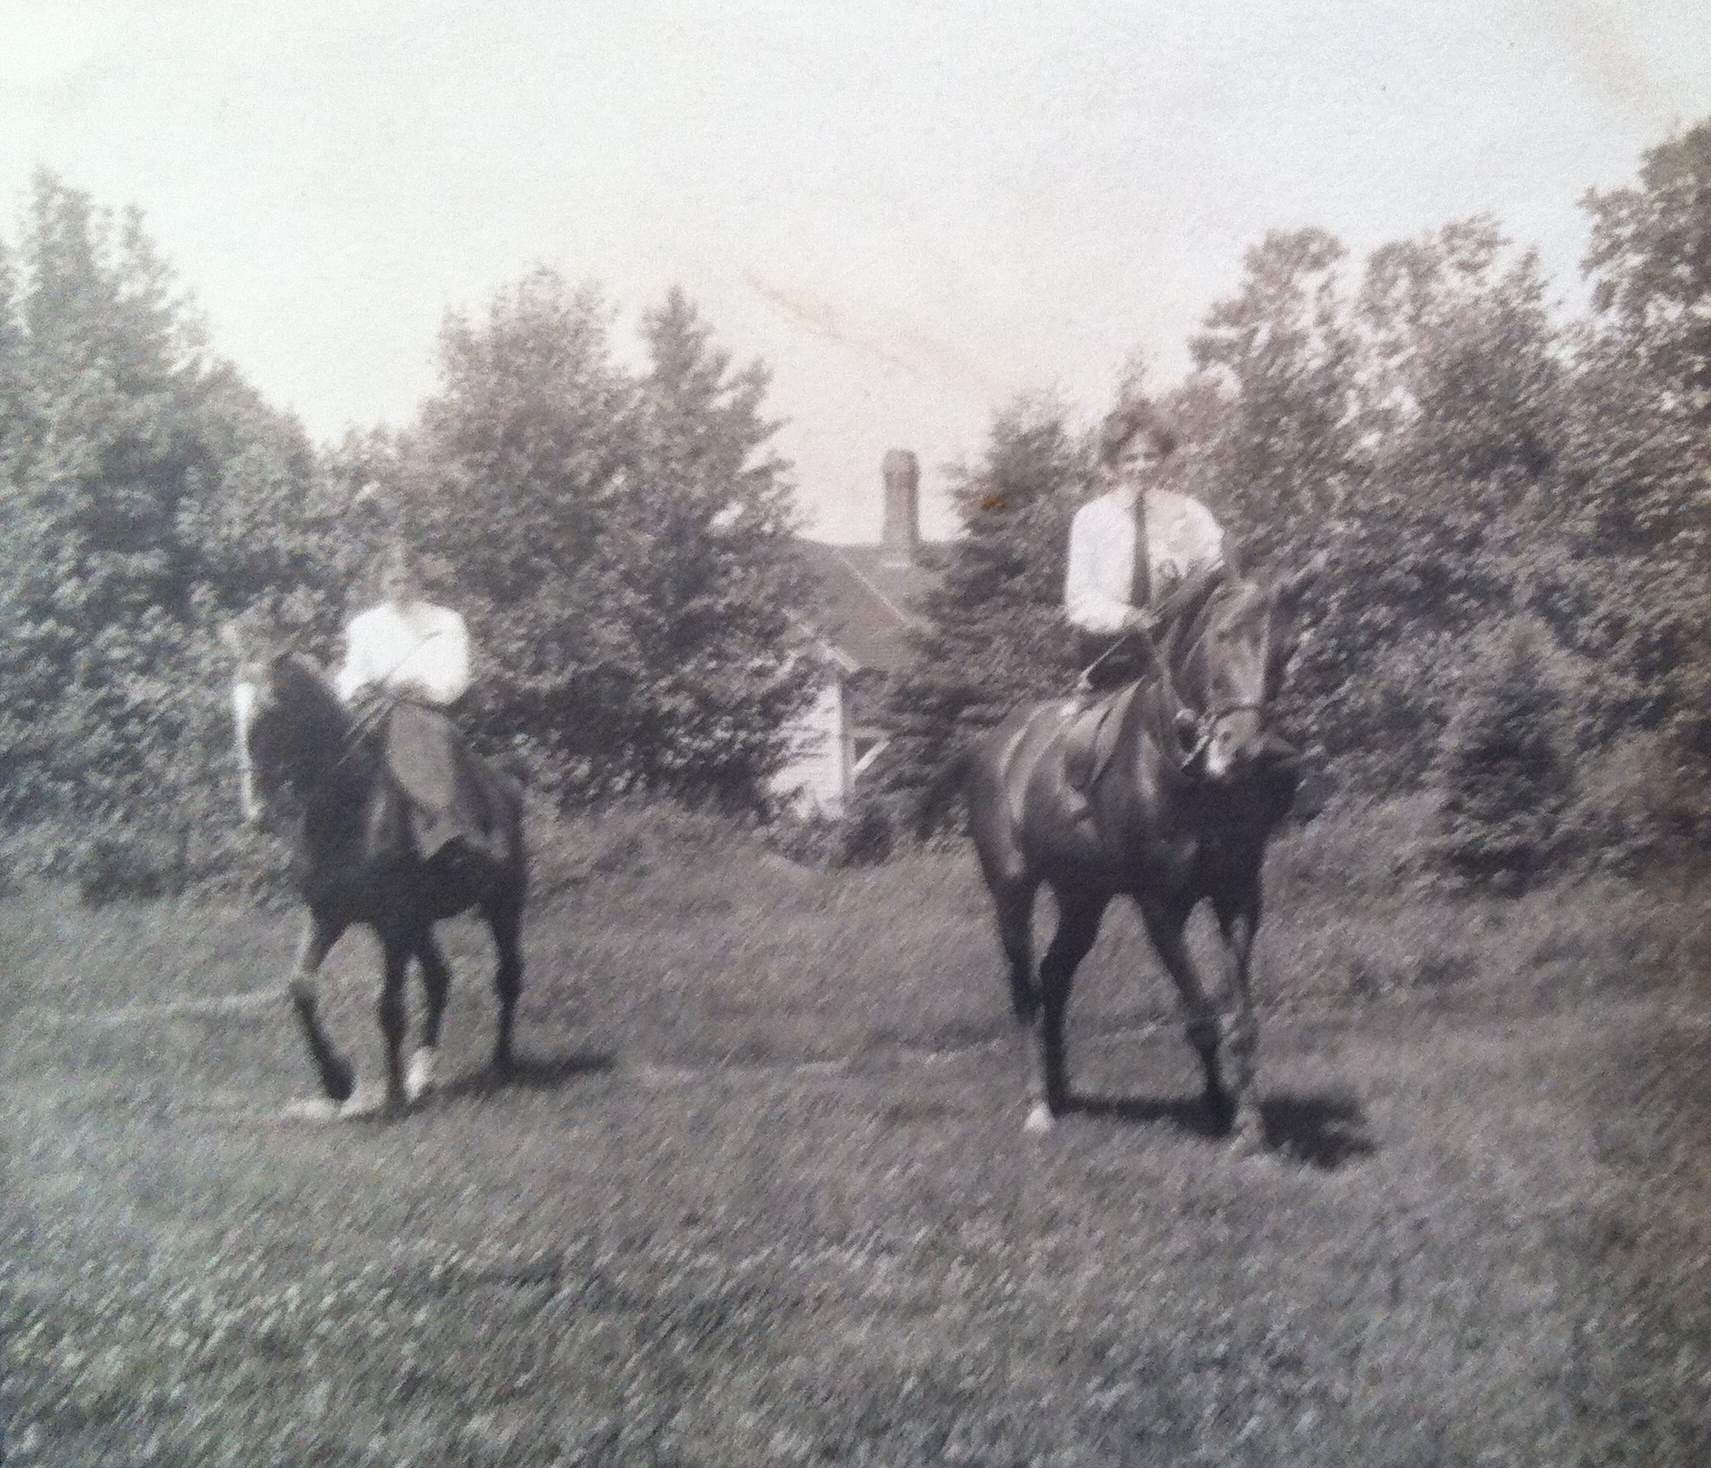 Two riders on horseback in a field bordered by trees.